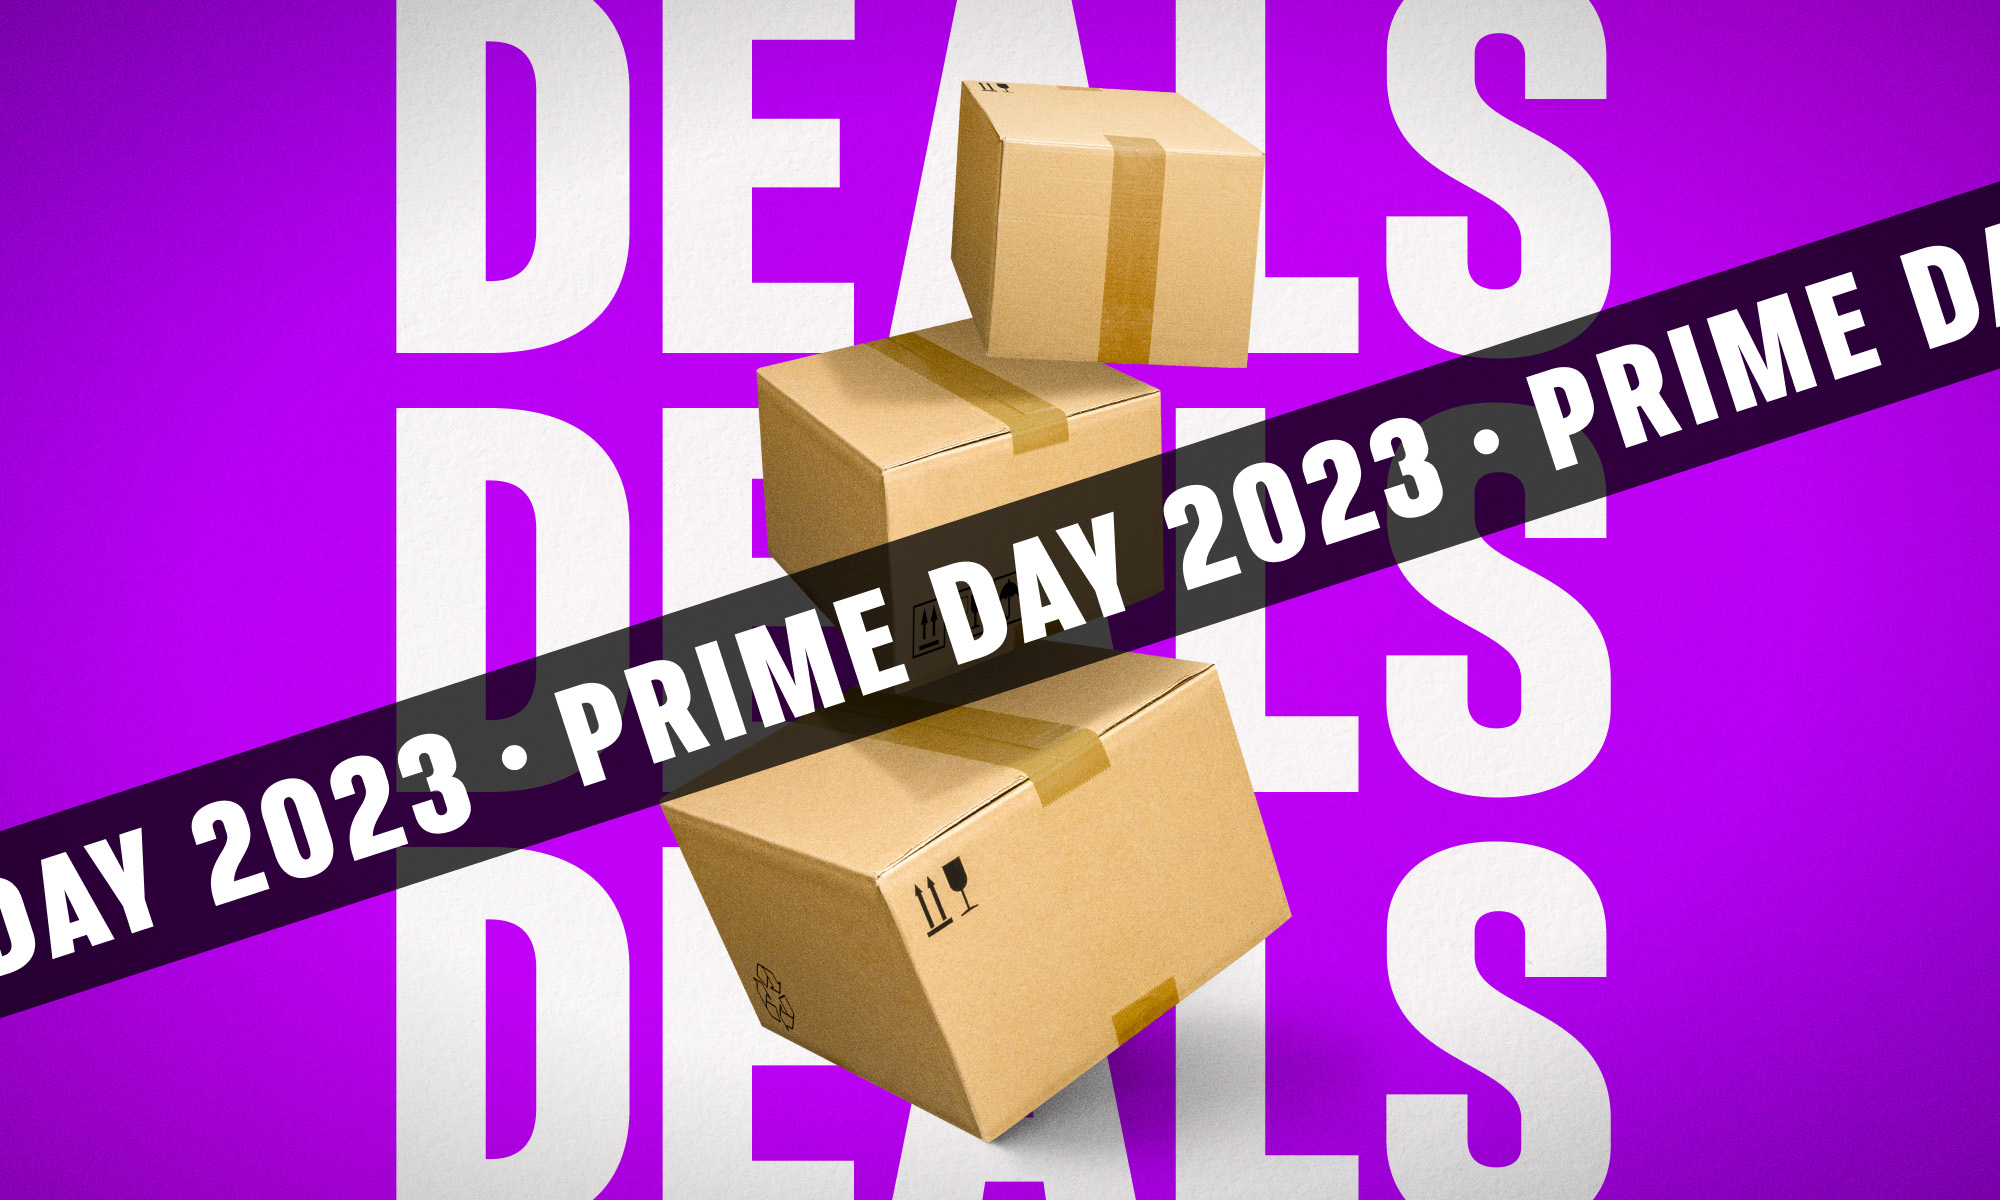 Best Alternative Prime Day Sales and Deals 2023